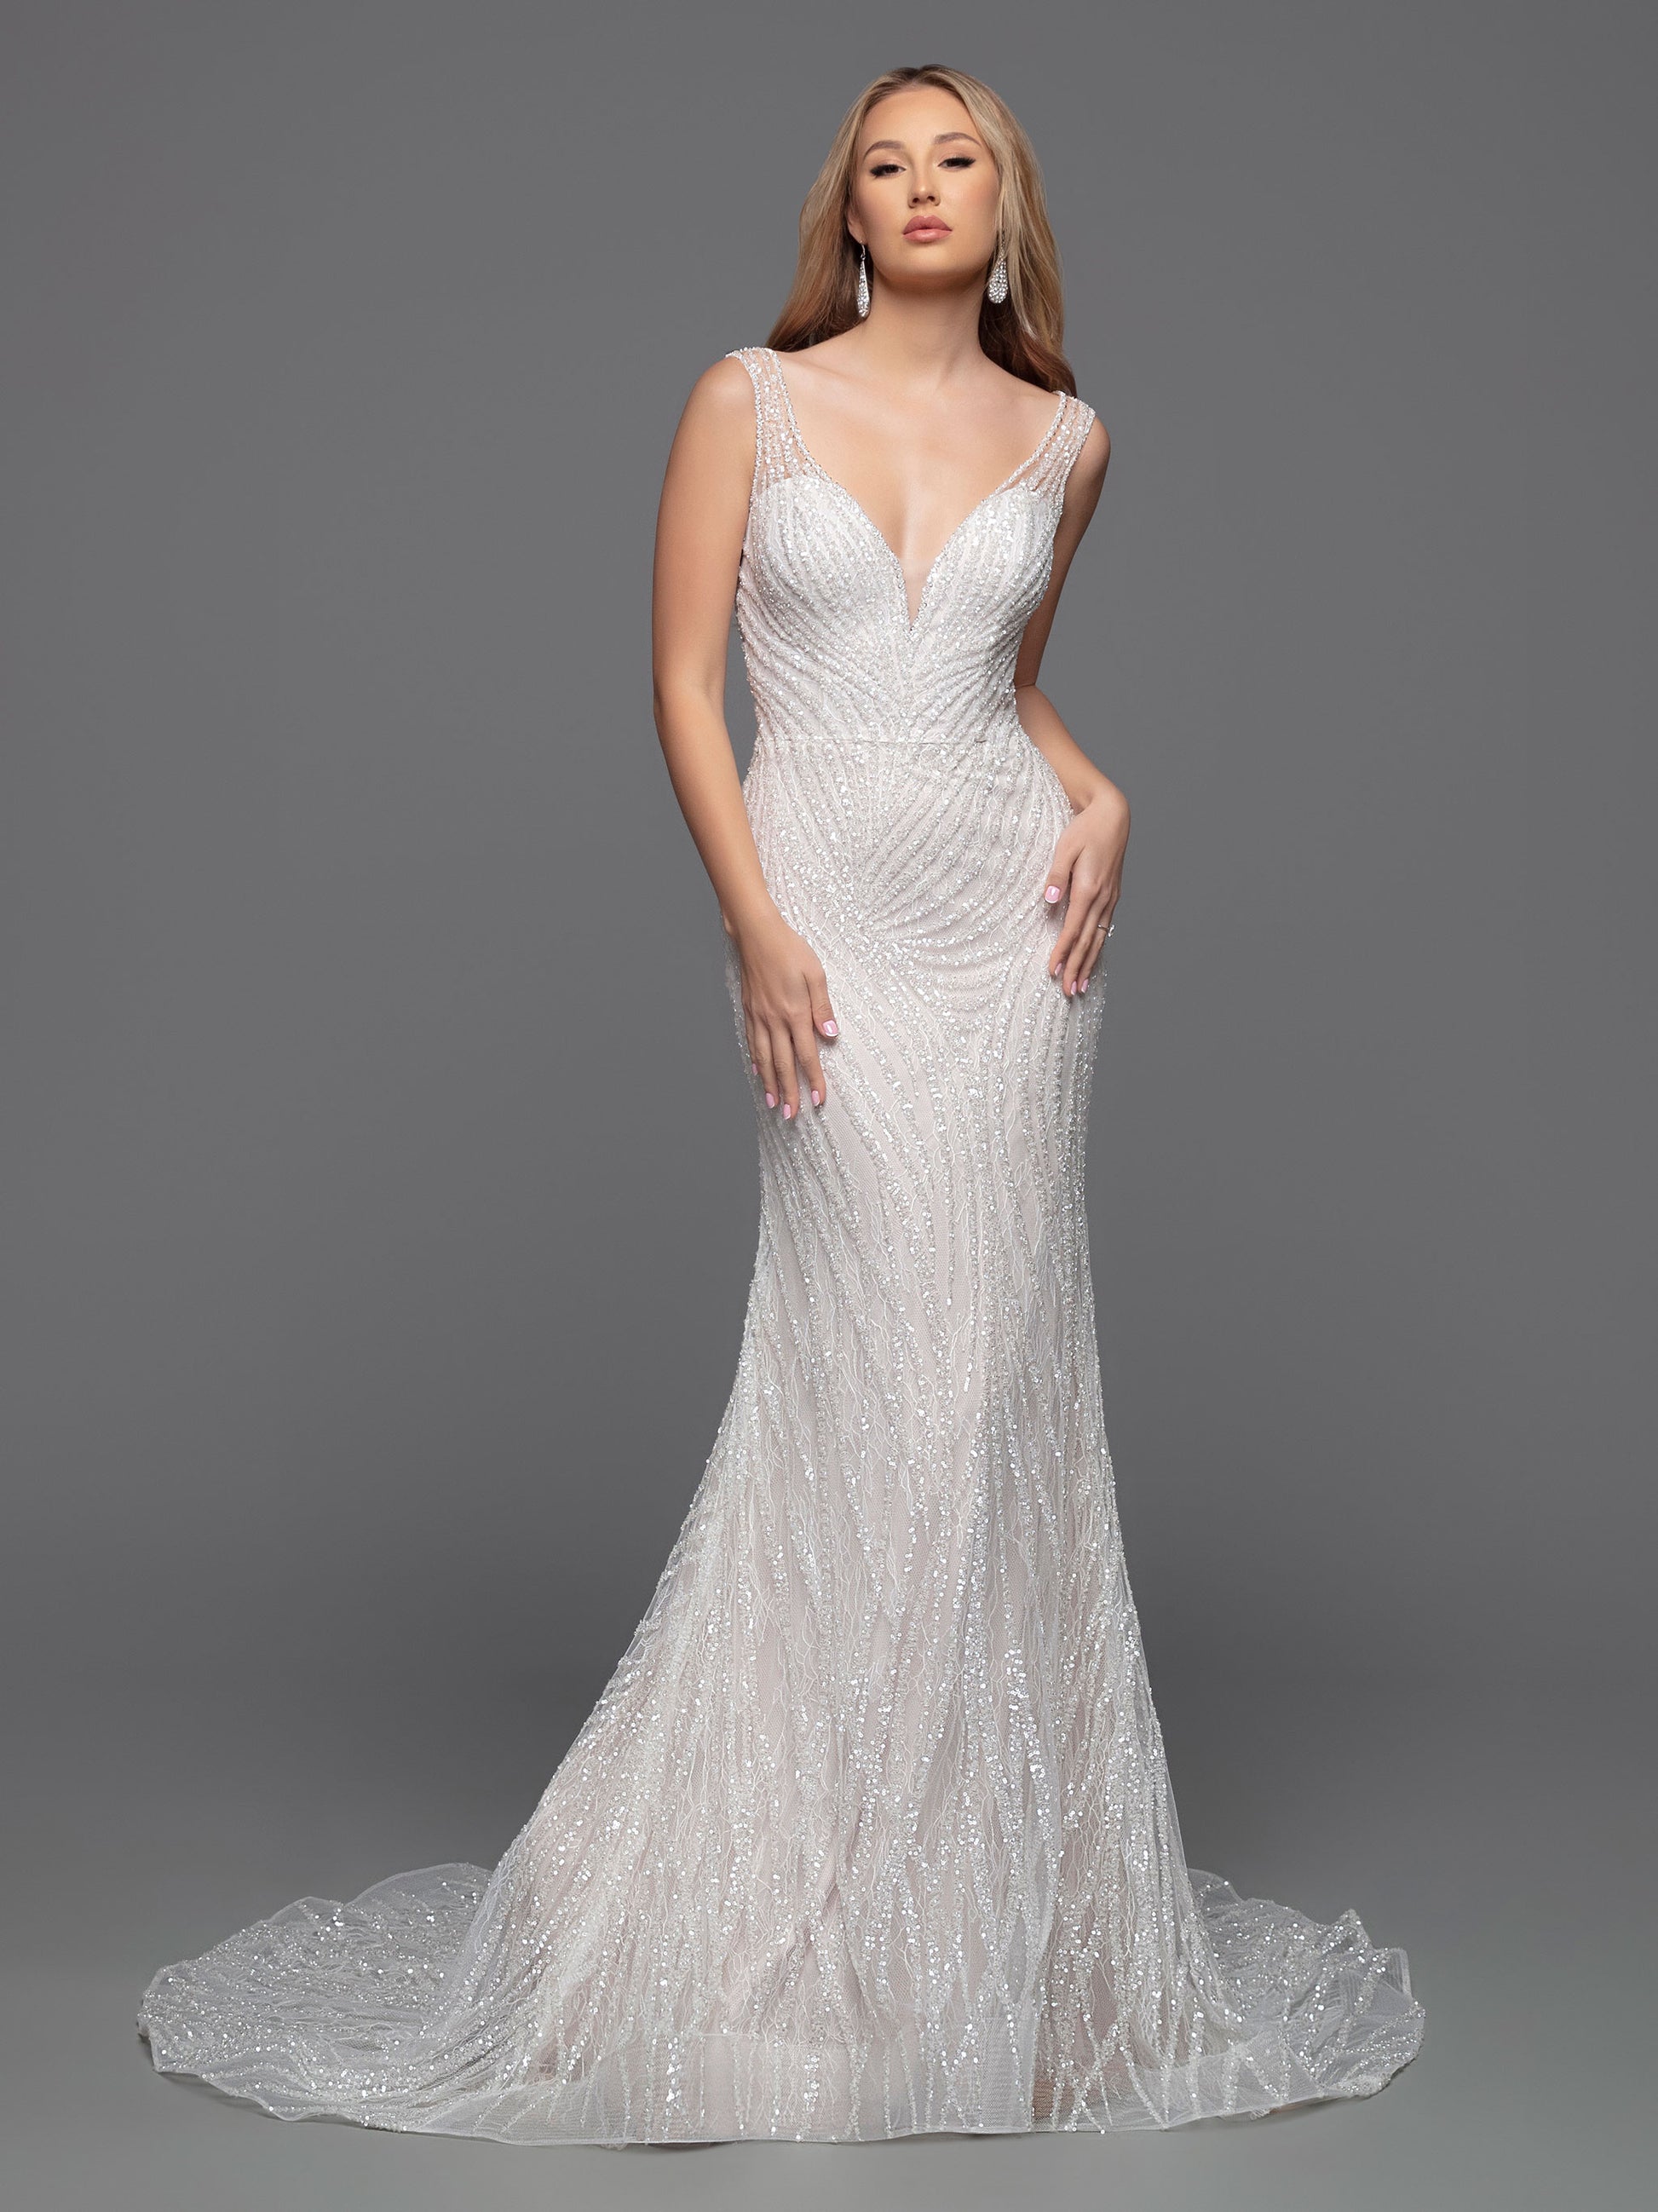 The Davinci Bridal 50800 wedding dress is the perfect combination of modern and classic style. Its fitted silhouette and V-neckline highlight a bride's shape while the geometric beading brings a touch of sparkle and glamour. The sheer straps and chapel train add a hint of allure. Ideal for a chic and sophisticated wedding.  Sizes: 2-20  Colors: Ivory/Ivory, Ivory/Nude